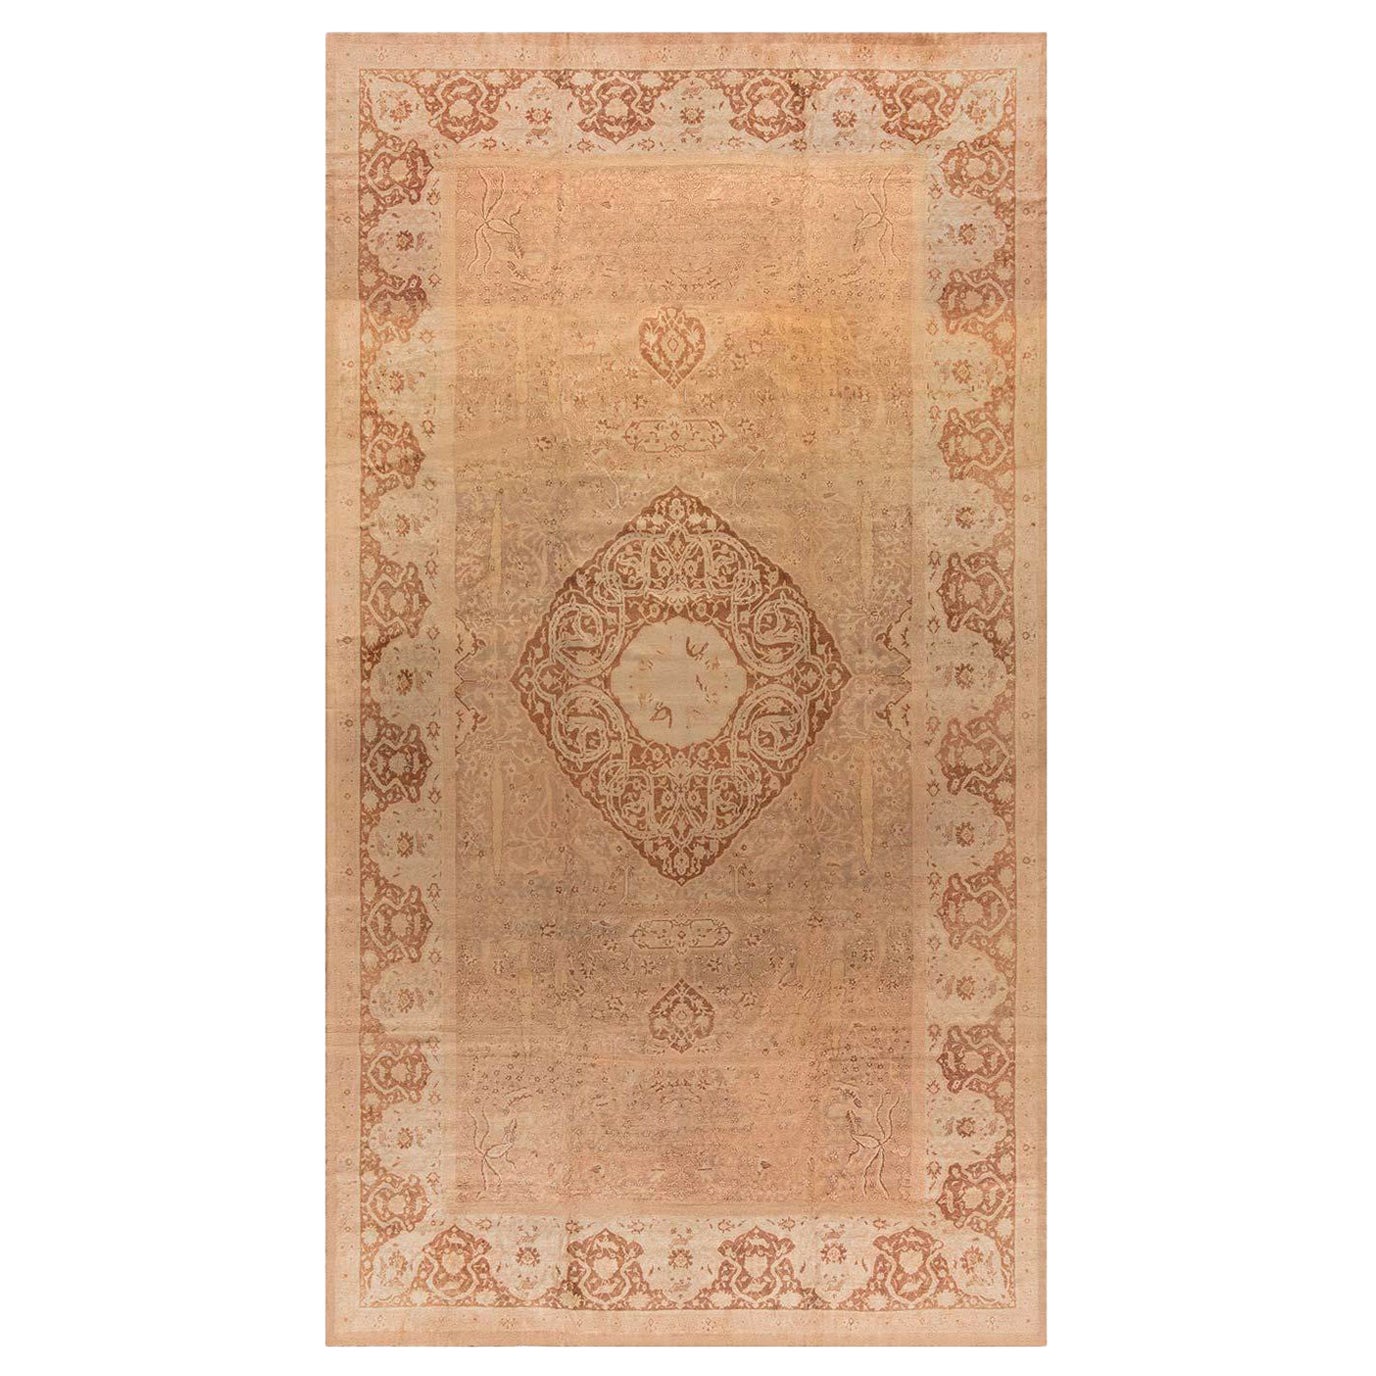 Authentic 19th Century Indian Amritsar Rug